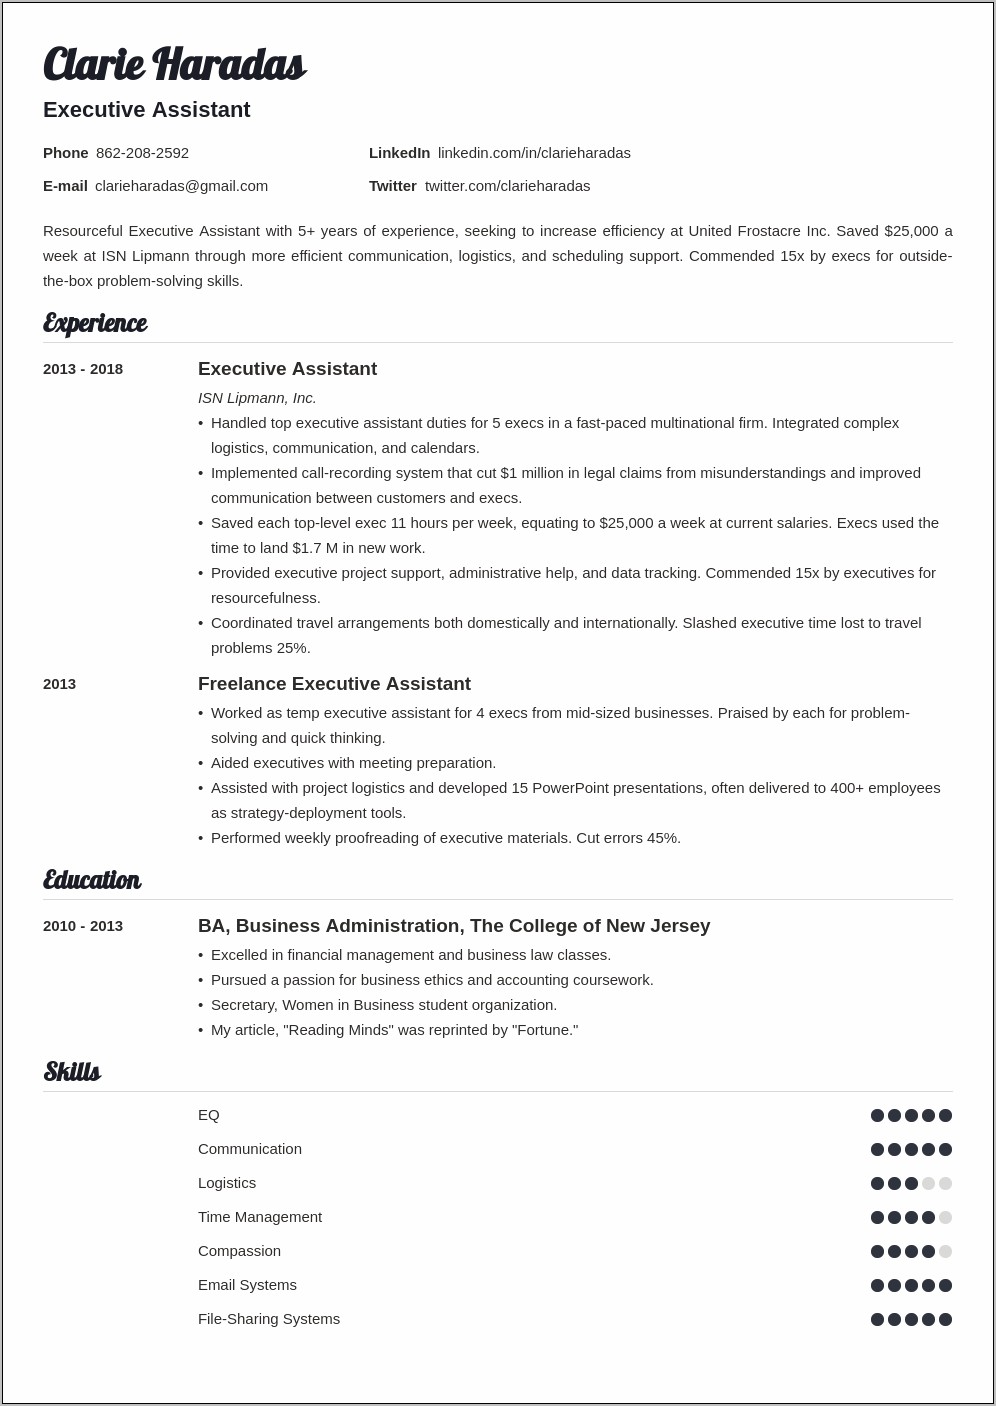 Sample Executive Assistant Resume For Career Change